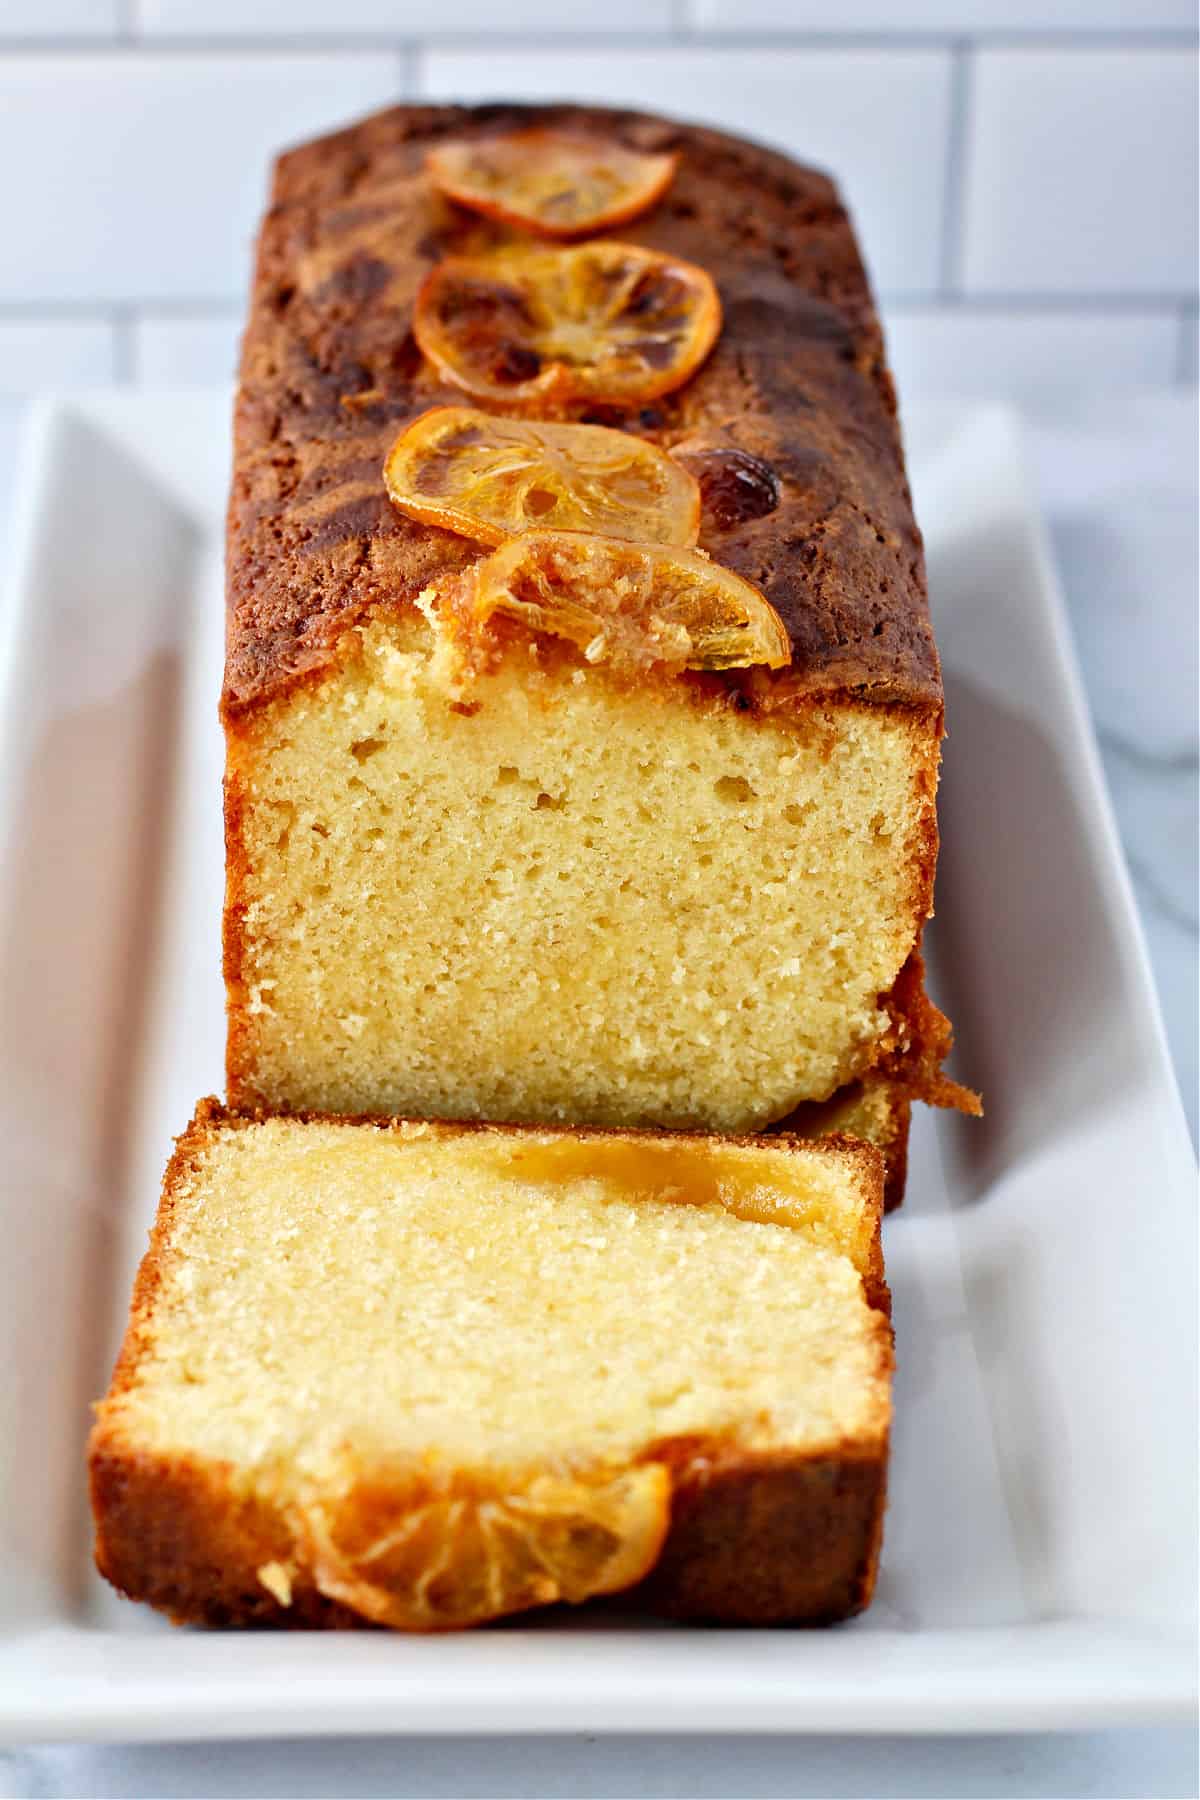 Lemon-Curd Pound Cake with candied lemons on top.